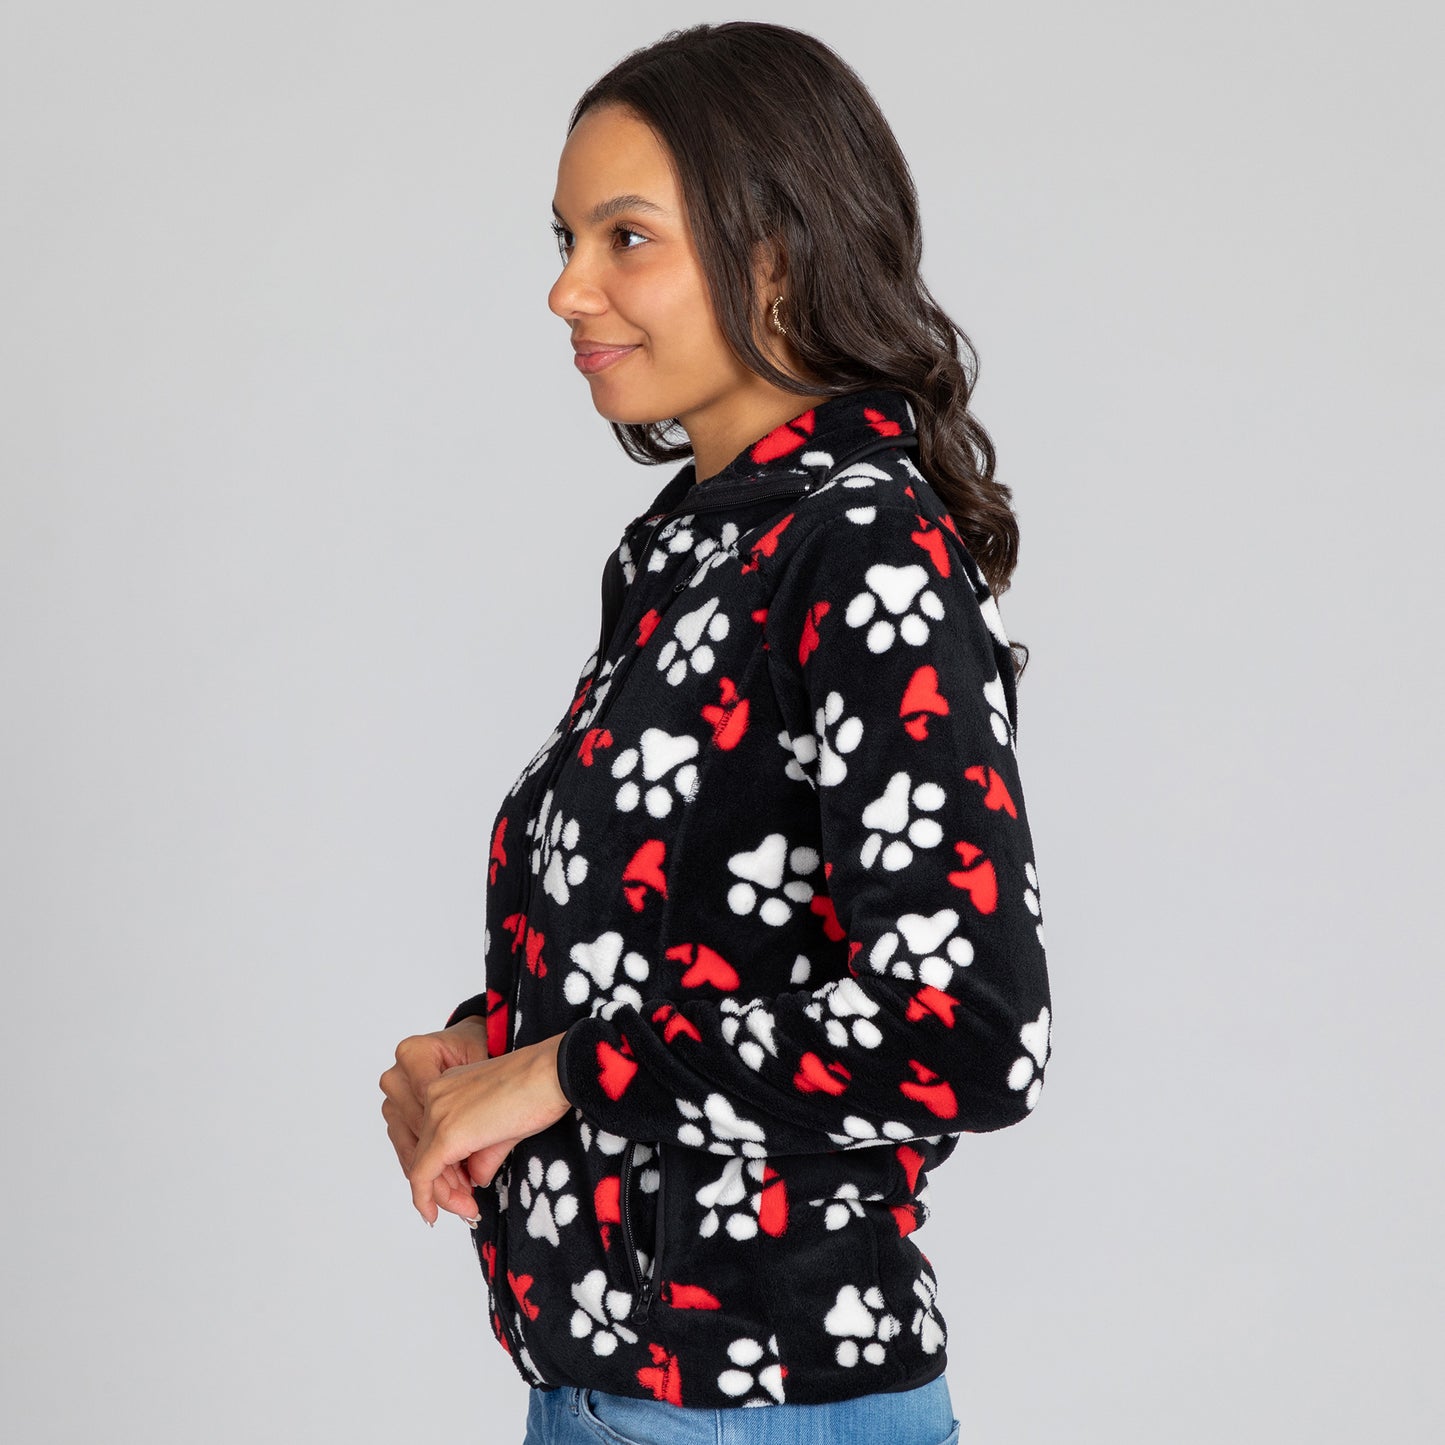 Printed Paws Fleece Trimmed Zippered Jacket